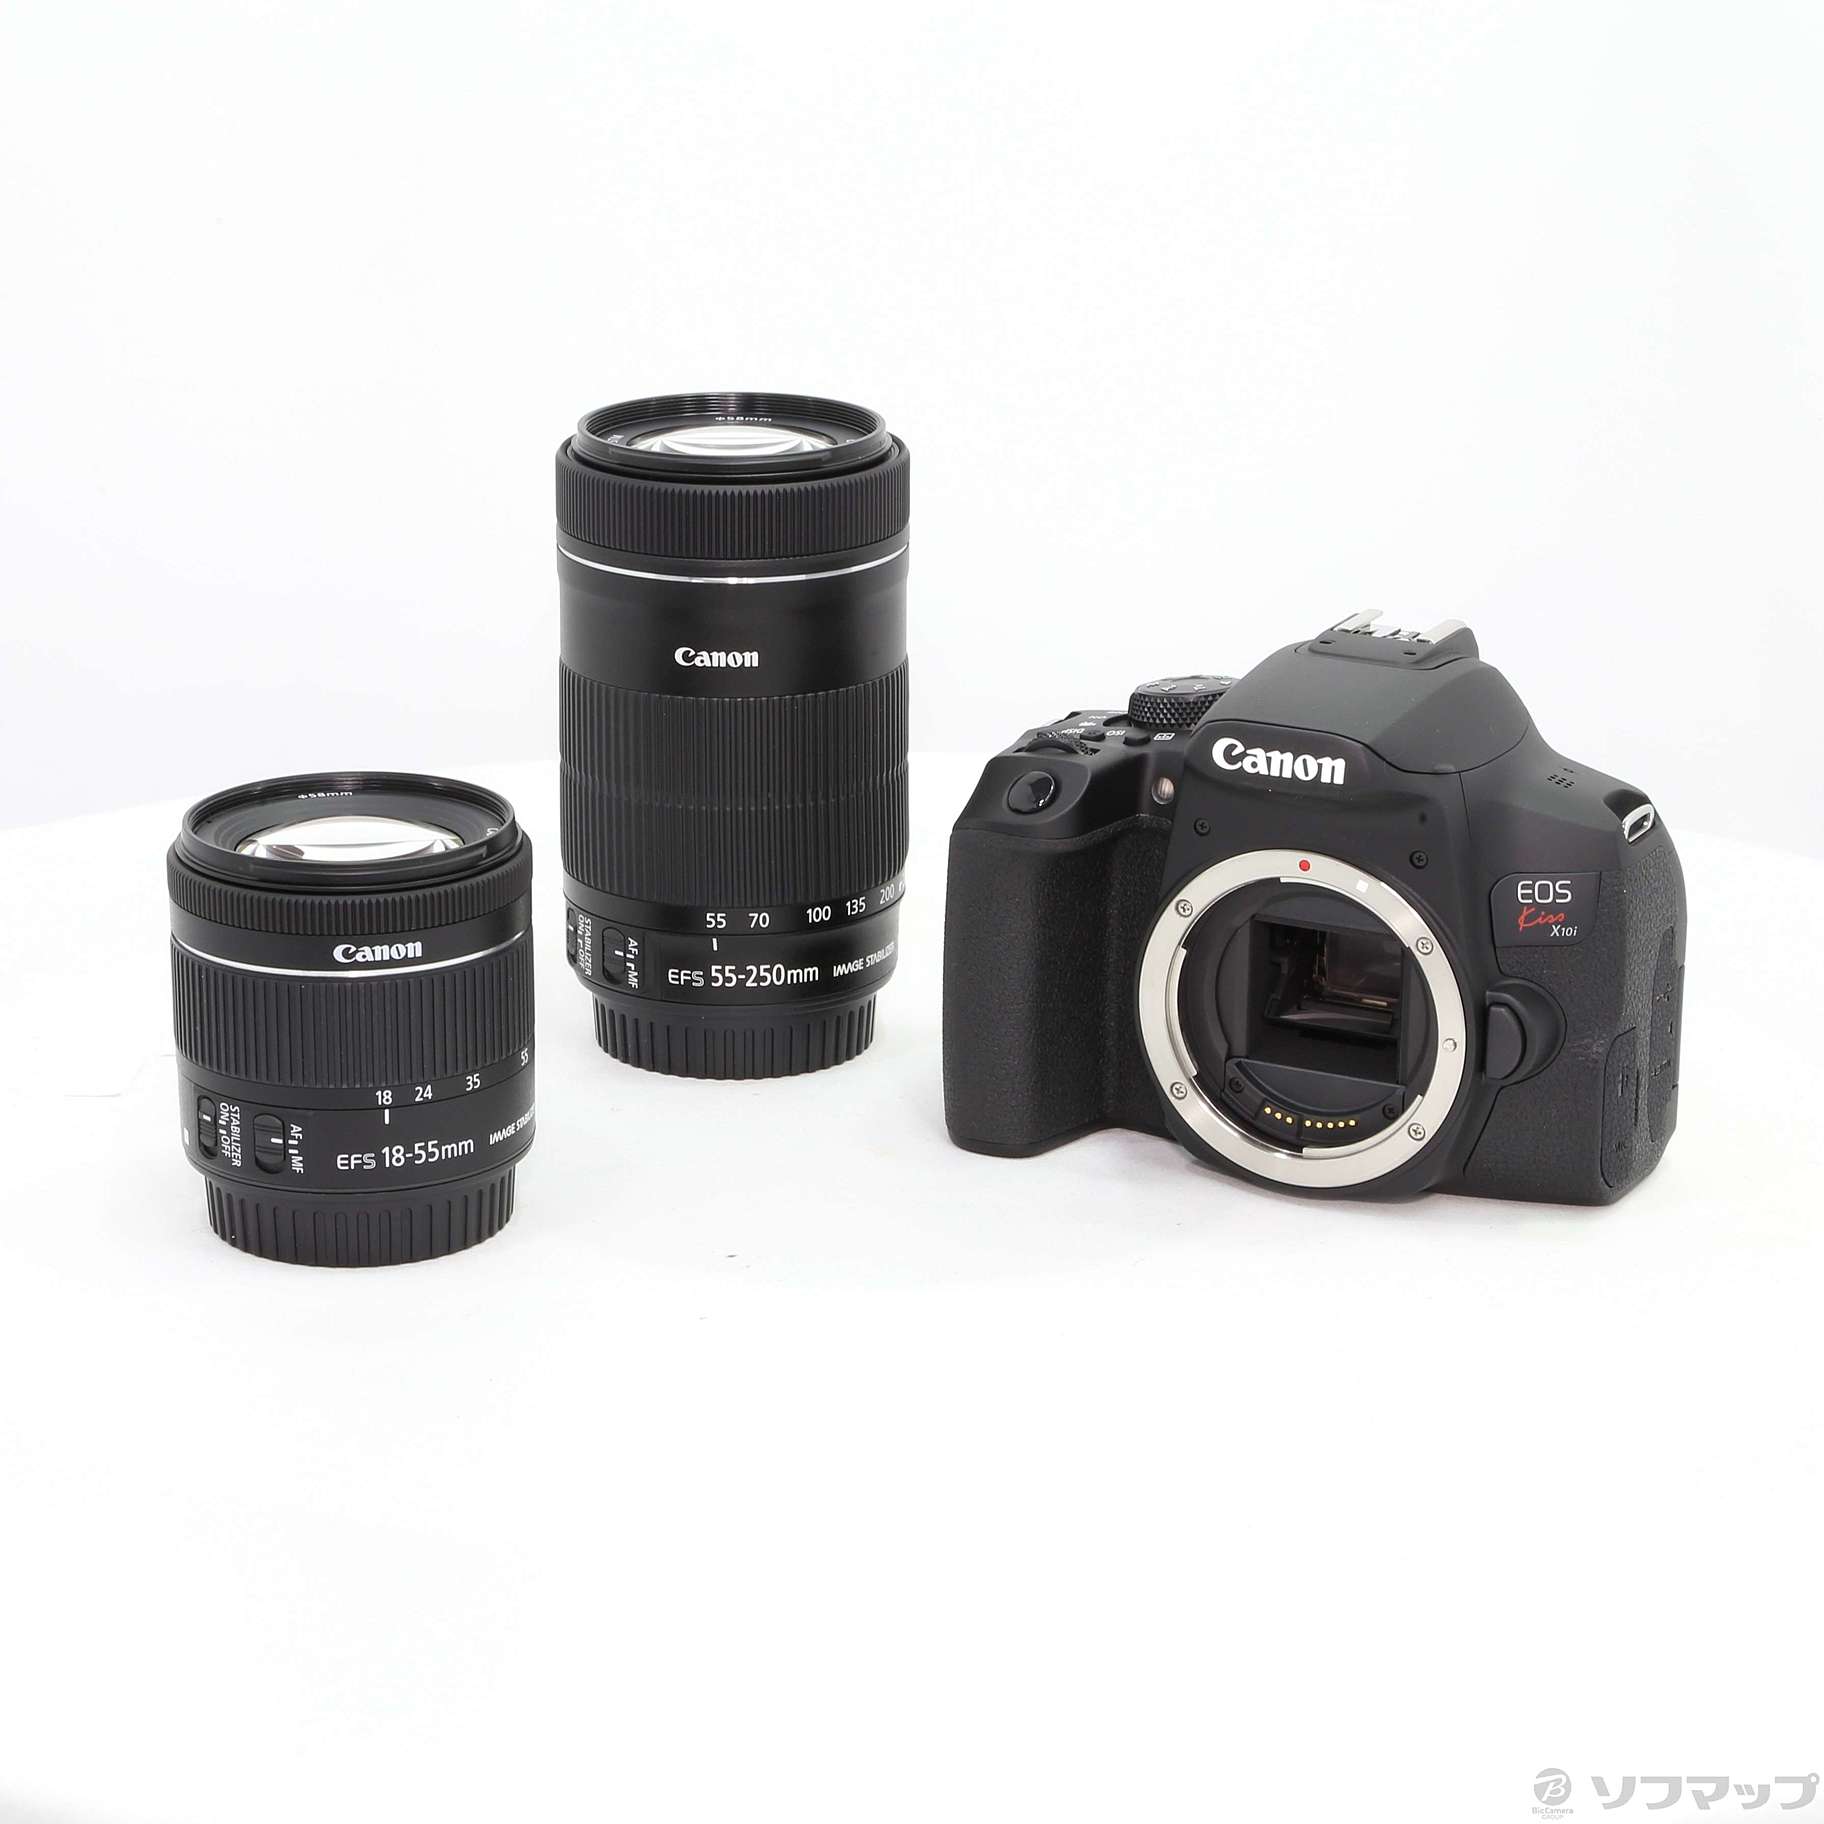 Canon EOS Kiss X10i ダブルズームキット-